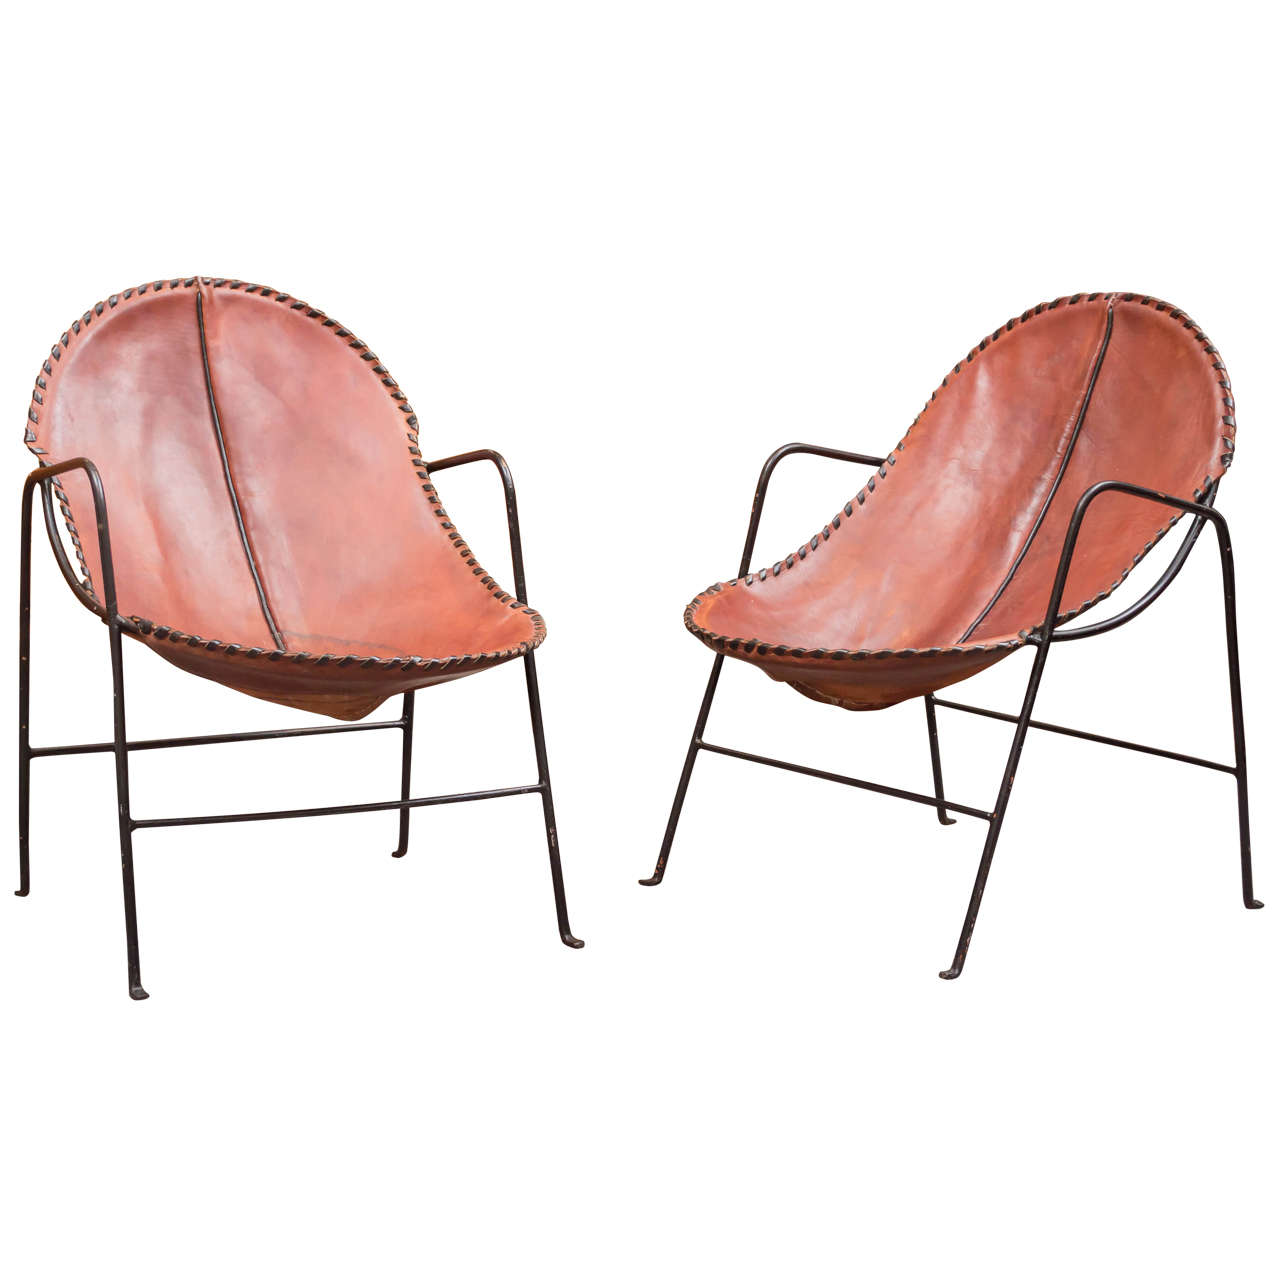 Pair of Mexican Modern Chairs